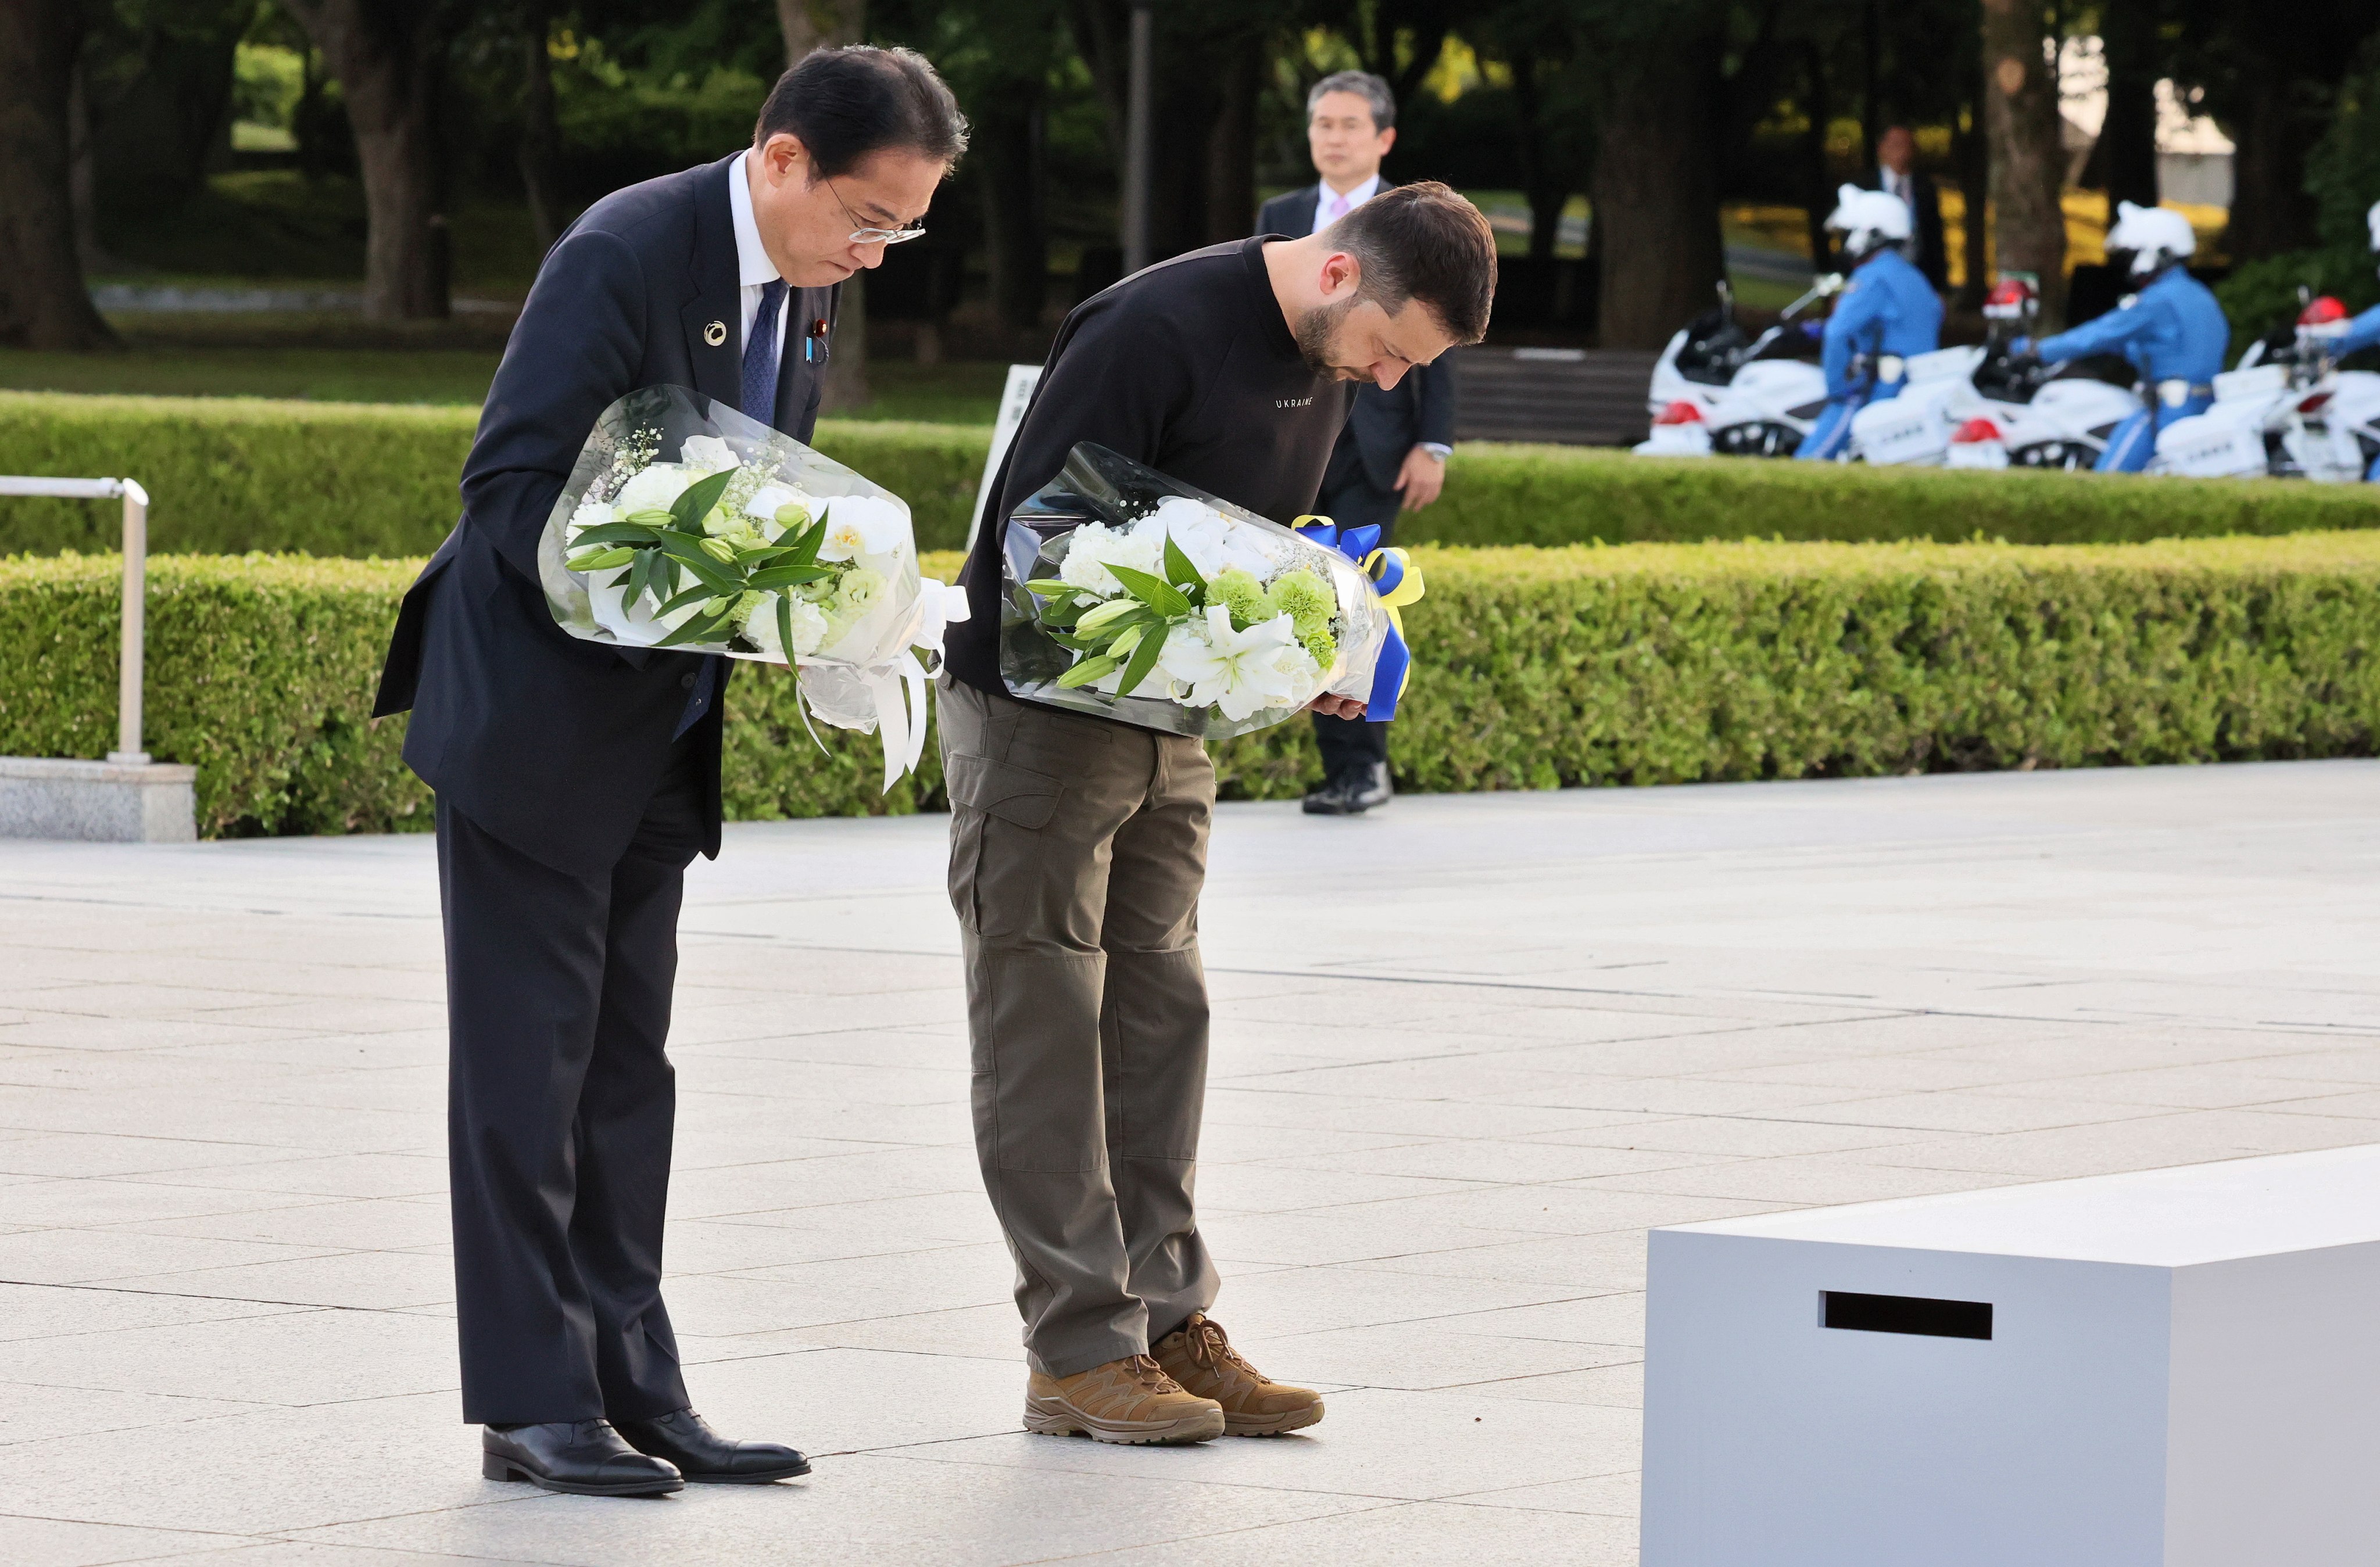 Japan’s Prime Minister Fumio Kishida, left, and Ukraine’s President Volodymyr Zelensky bow as they lay flowers in front of the Cenotaph for the Victims of the atomic nomb at the Hiroshima Peace Memorial Park in Hiroshima, Japan on Sunday. Photo: EPA-EFE / G7 Hiroshima Summit Host / Handout